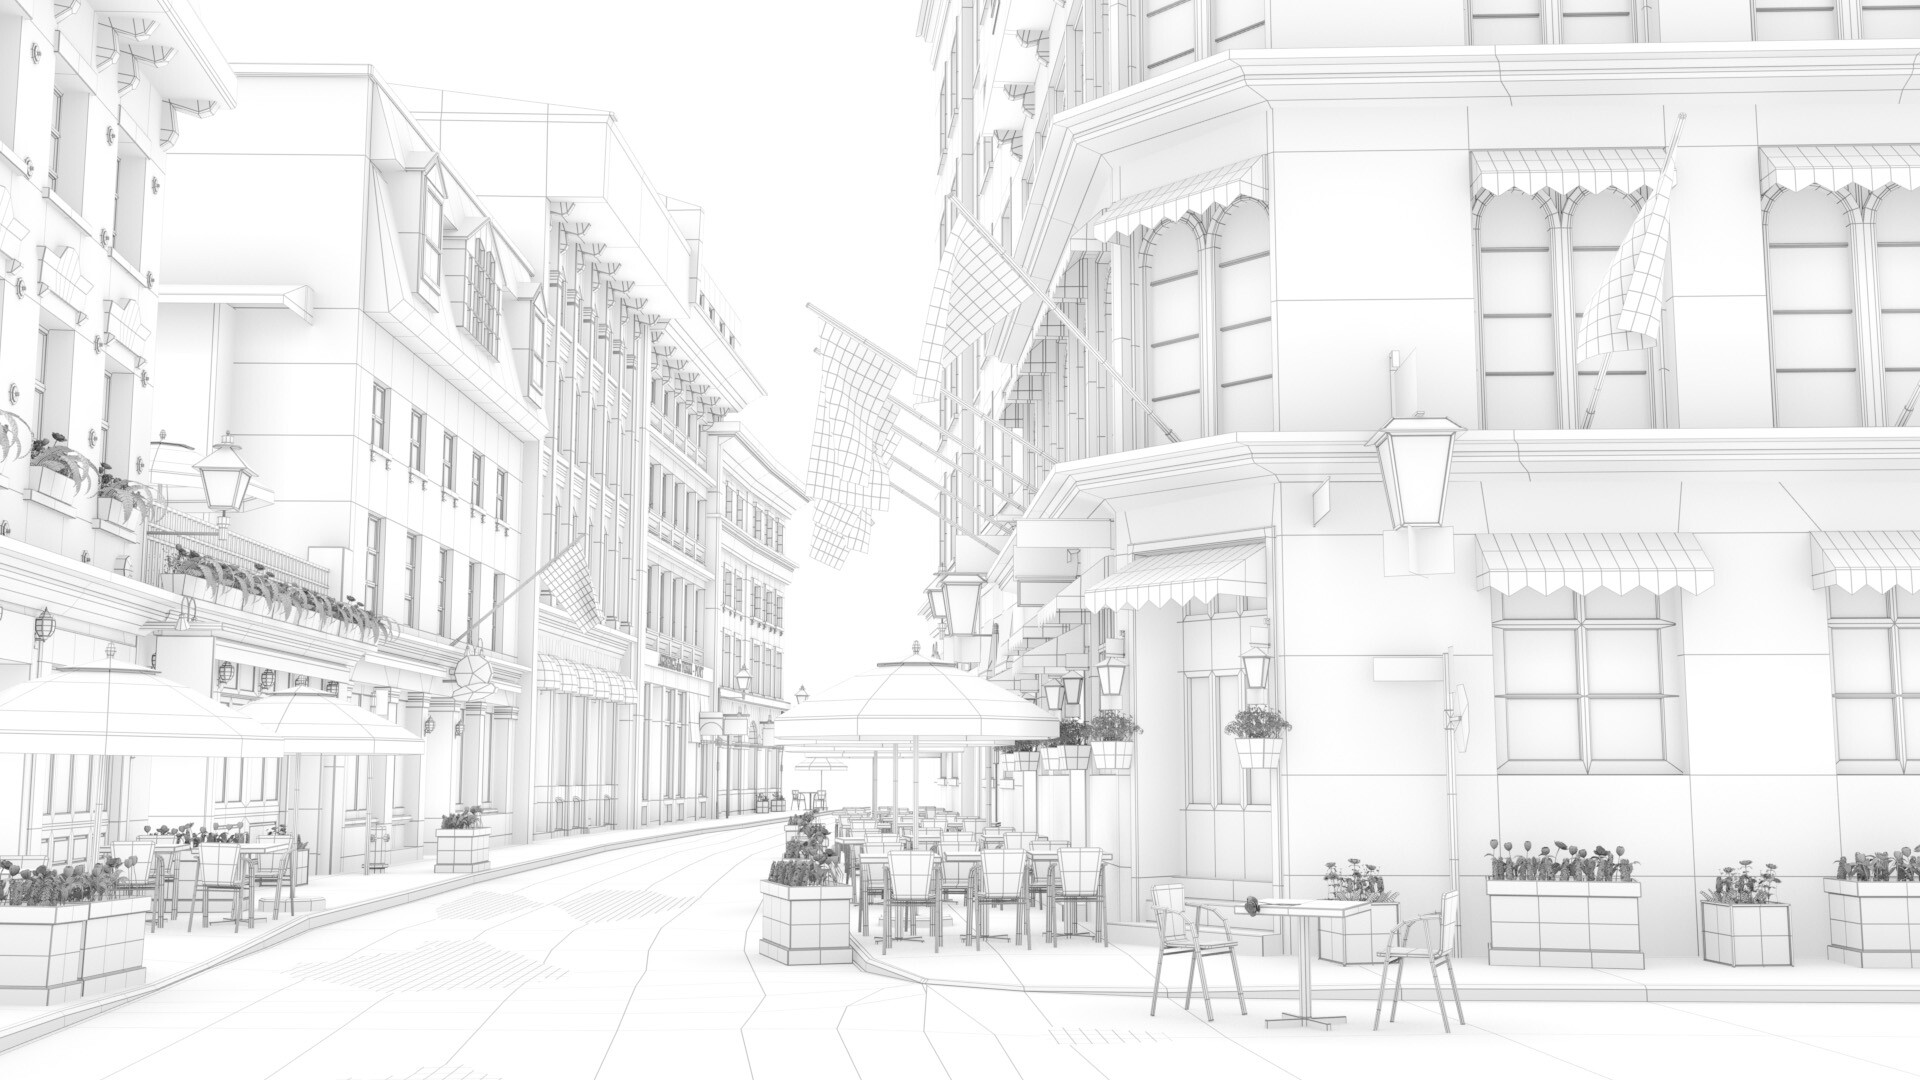 A wireframe image of a city street